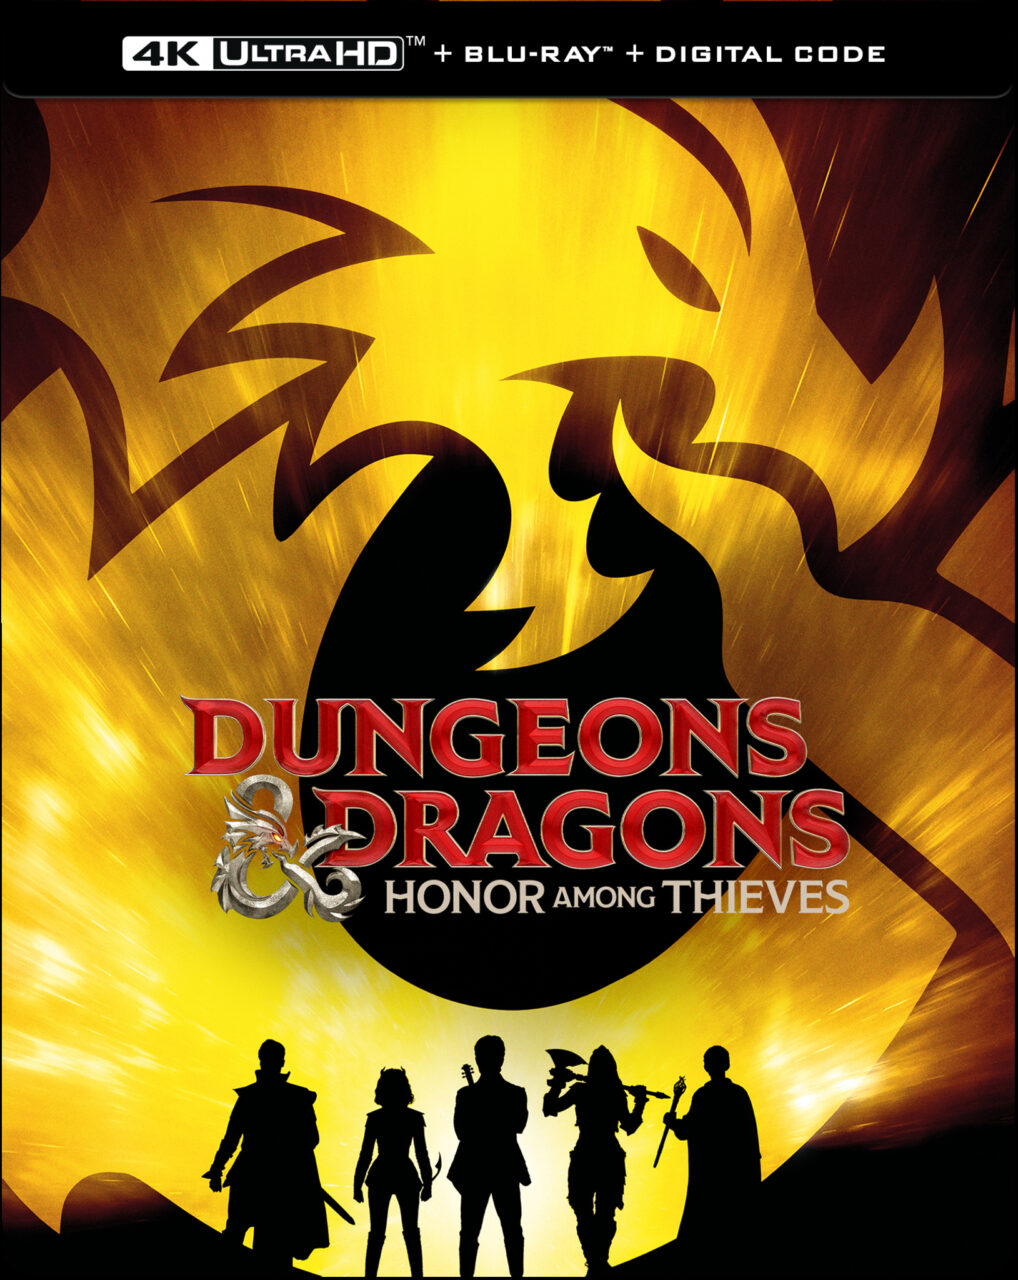 Dungeons & Dragons: Honor Among Thieves 4K Ultra HD Combo Pack cover (Paramount Home Entertainment)